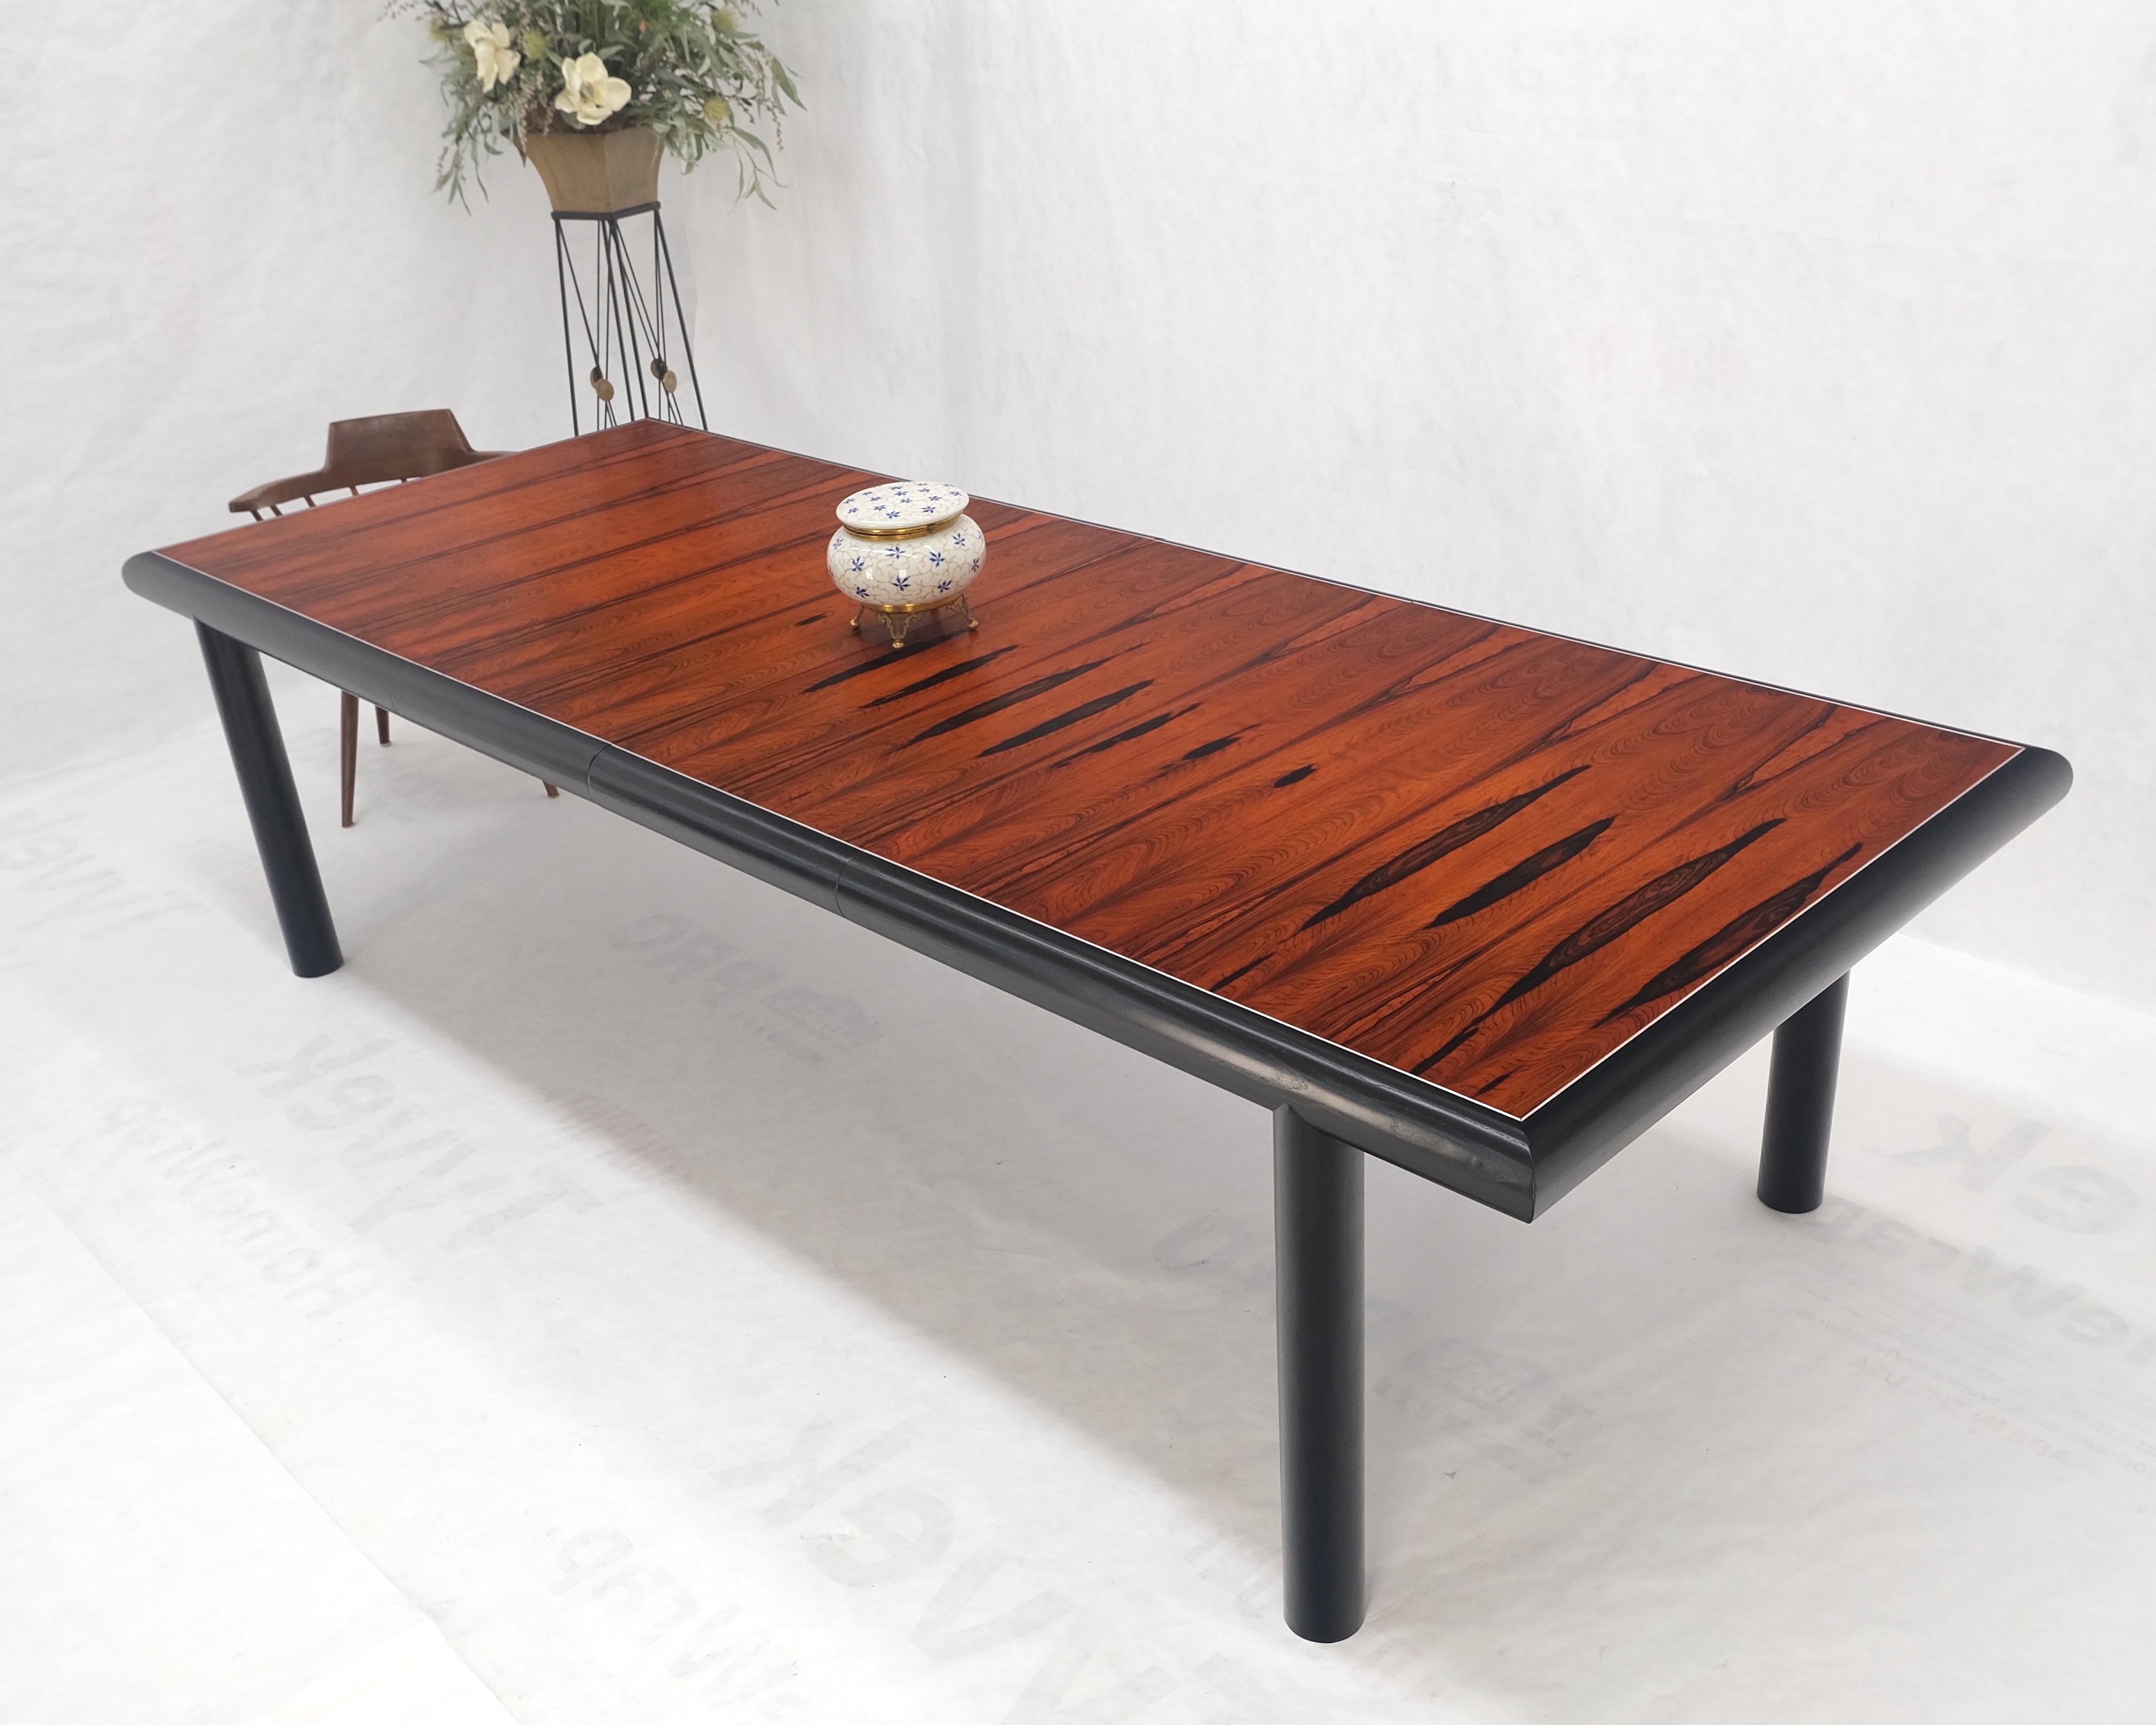 Lacquered Rosewood Top Black Lacquer Base Massive Cylinder Shape Legs Dining Table MINT! For Sale